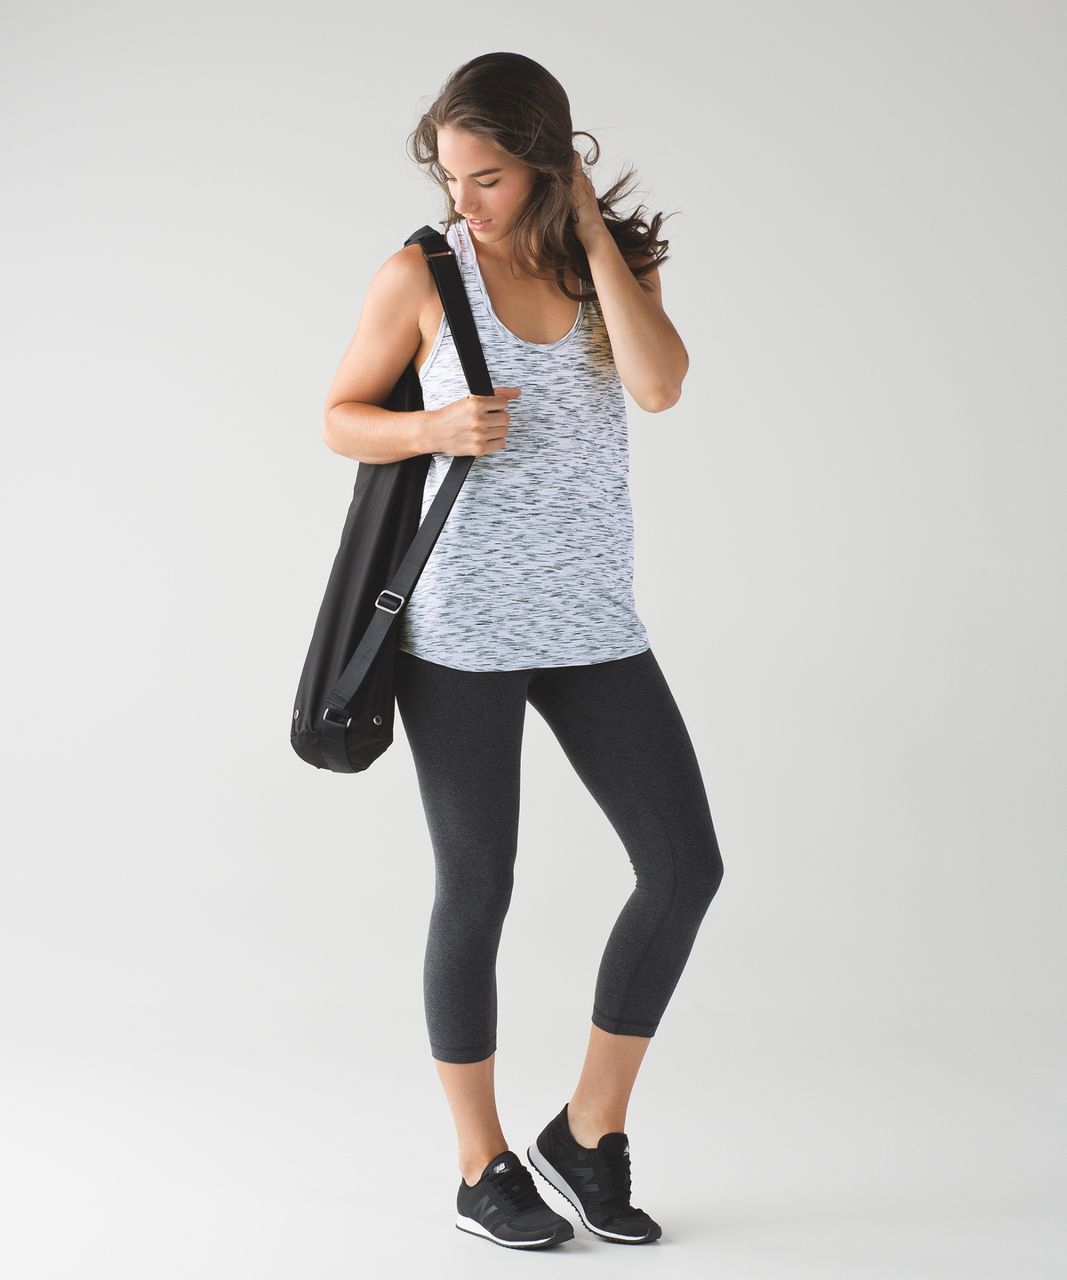 Lululemon Essential Tank - Tiger Space Dye Black White (First Release)